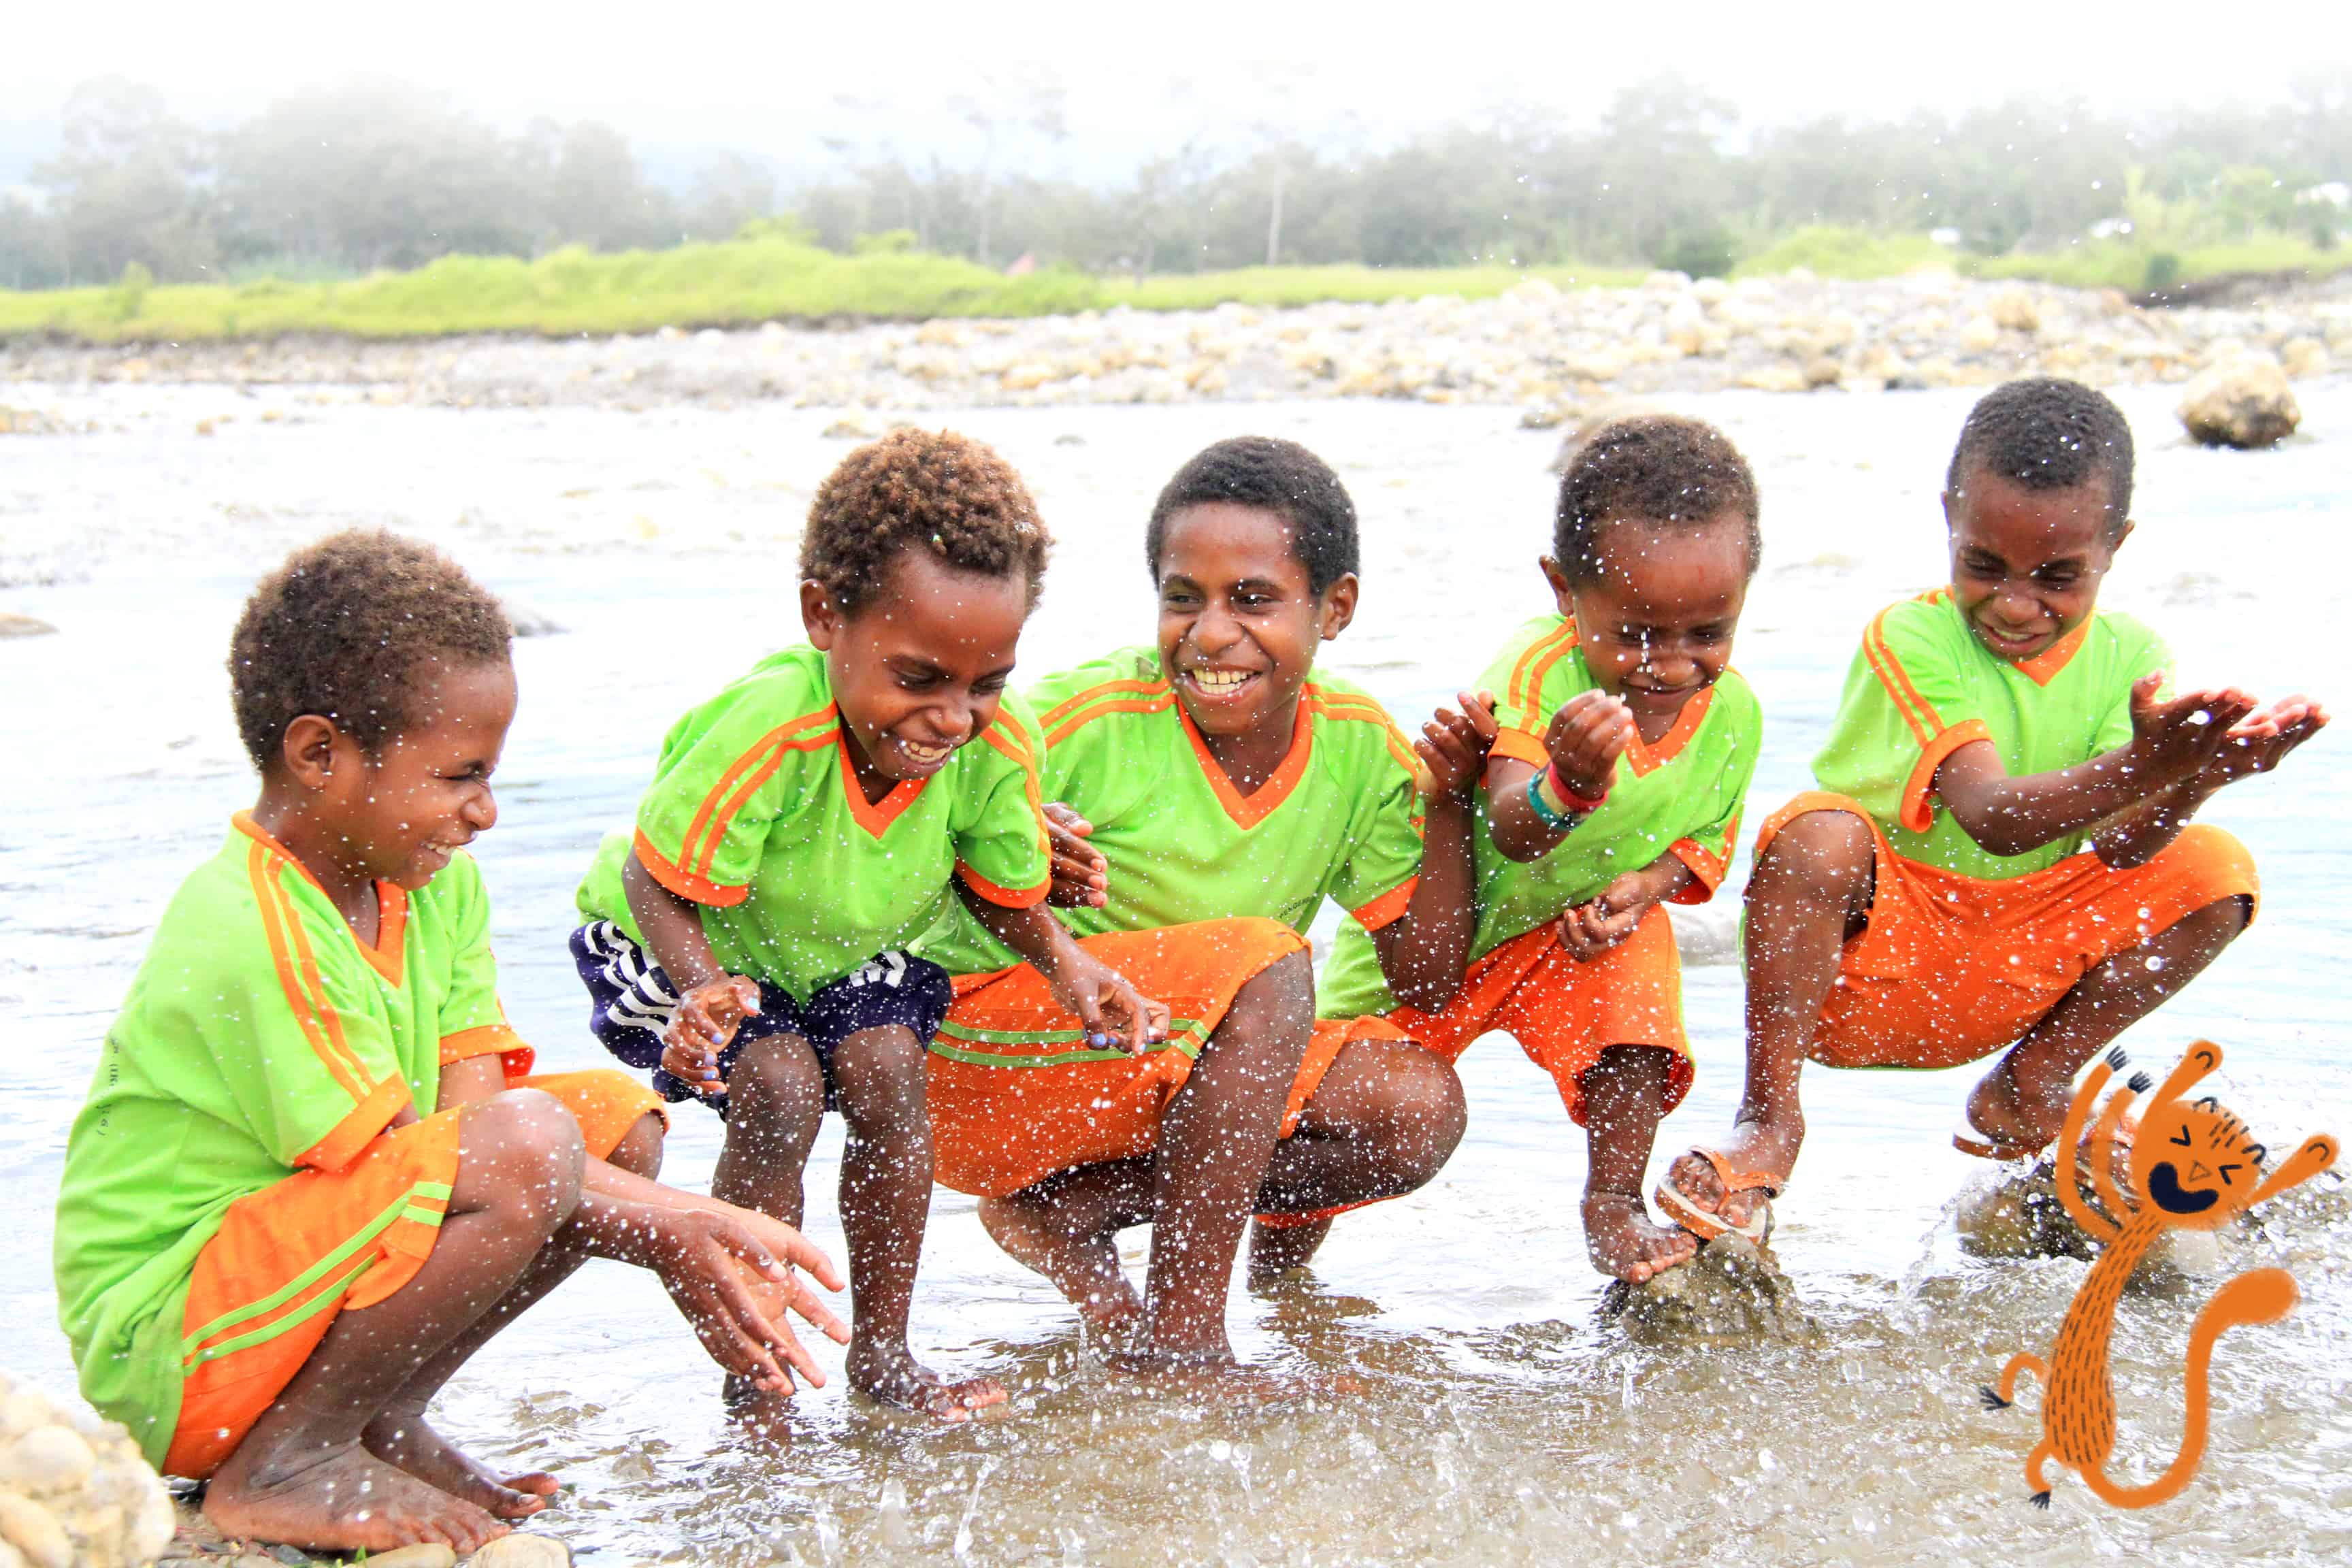 Children, boys and girls, wearing green and orange shirts with orange shorts, barefoot, gather at a river, stream, running water, landscape, to wash, play, splash up the water playfully, clean, bath, cleaning, themselves their hands, in the water.